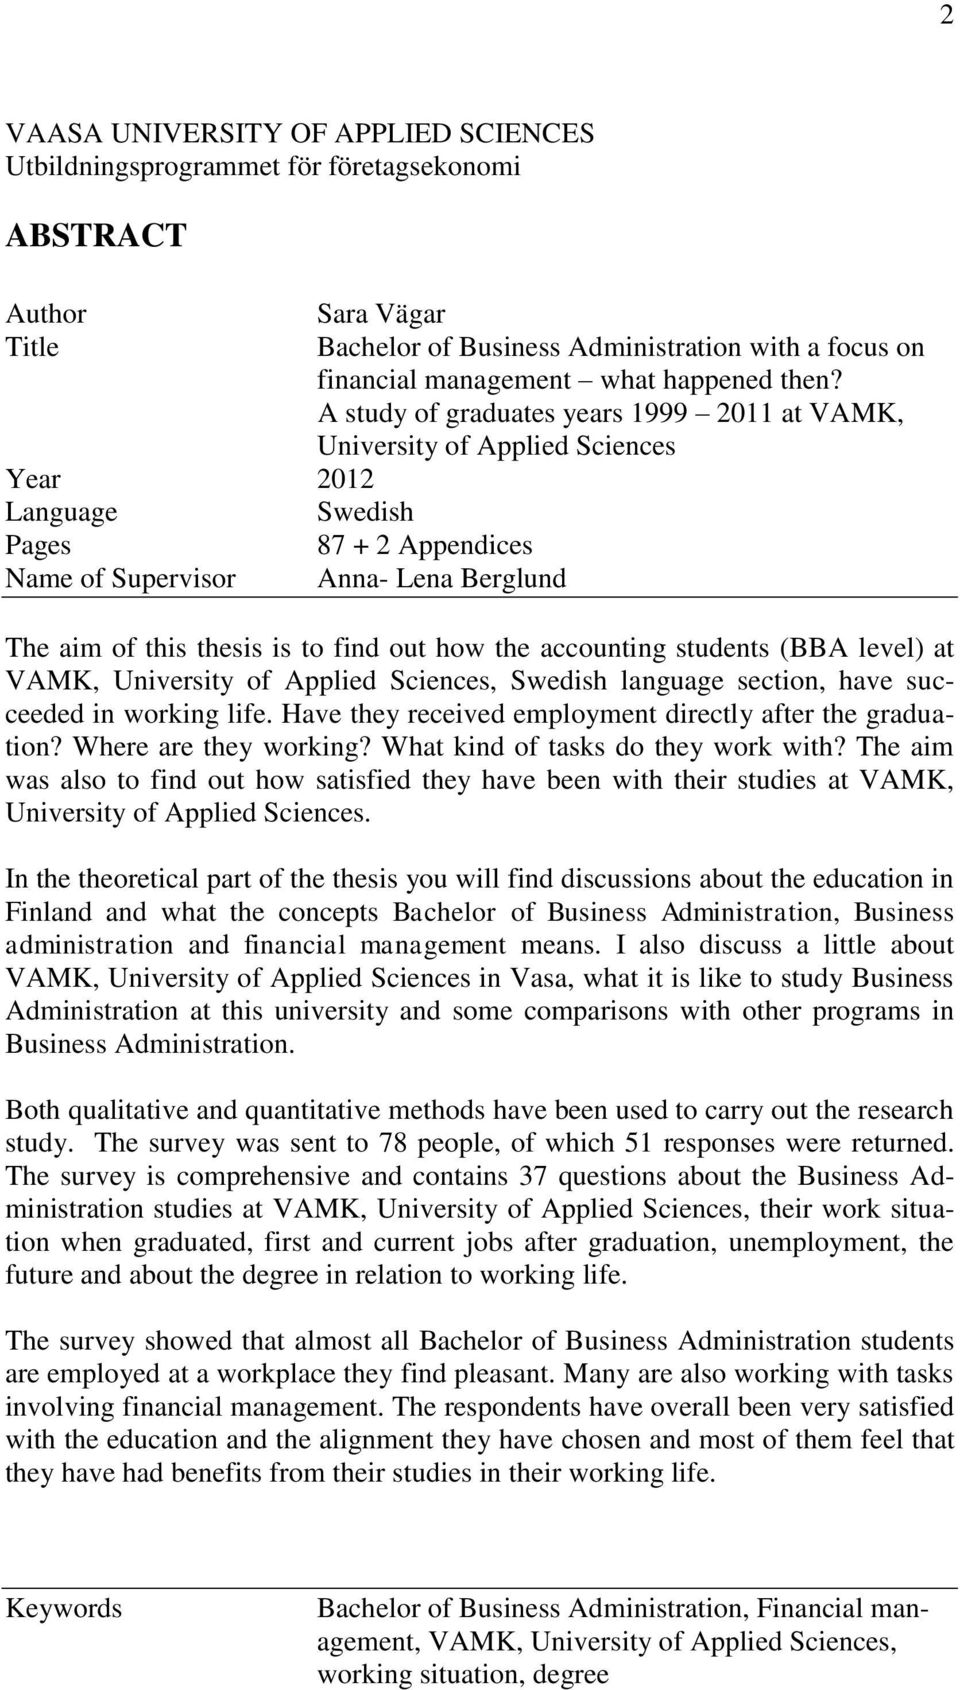 A study of graduates years 1999 2011 at VAMK, University of Applied Sciences Year 2012 Language Swedish Pages 87 + 2 Appendices Name of Supervisor Anna- Lena Berglund The aim of this thesis is to